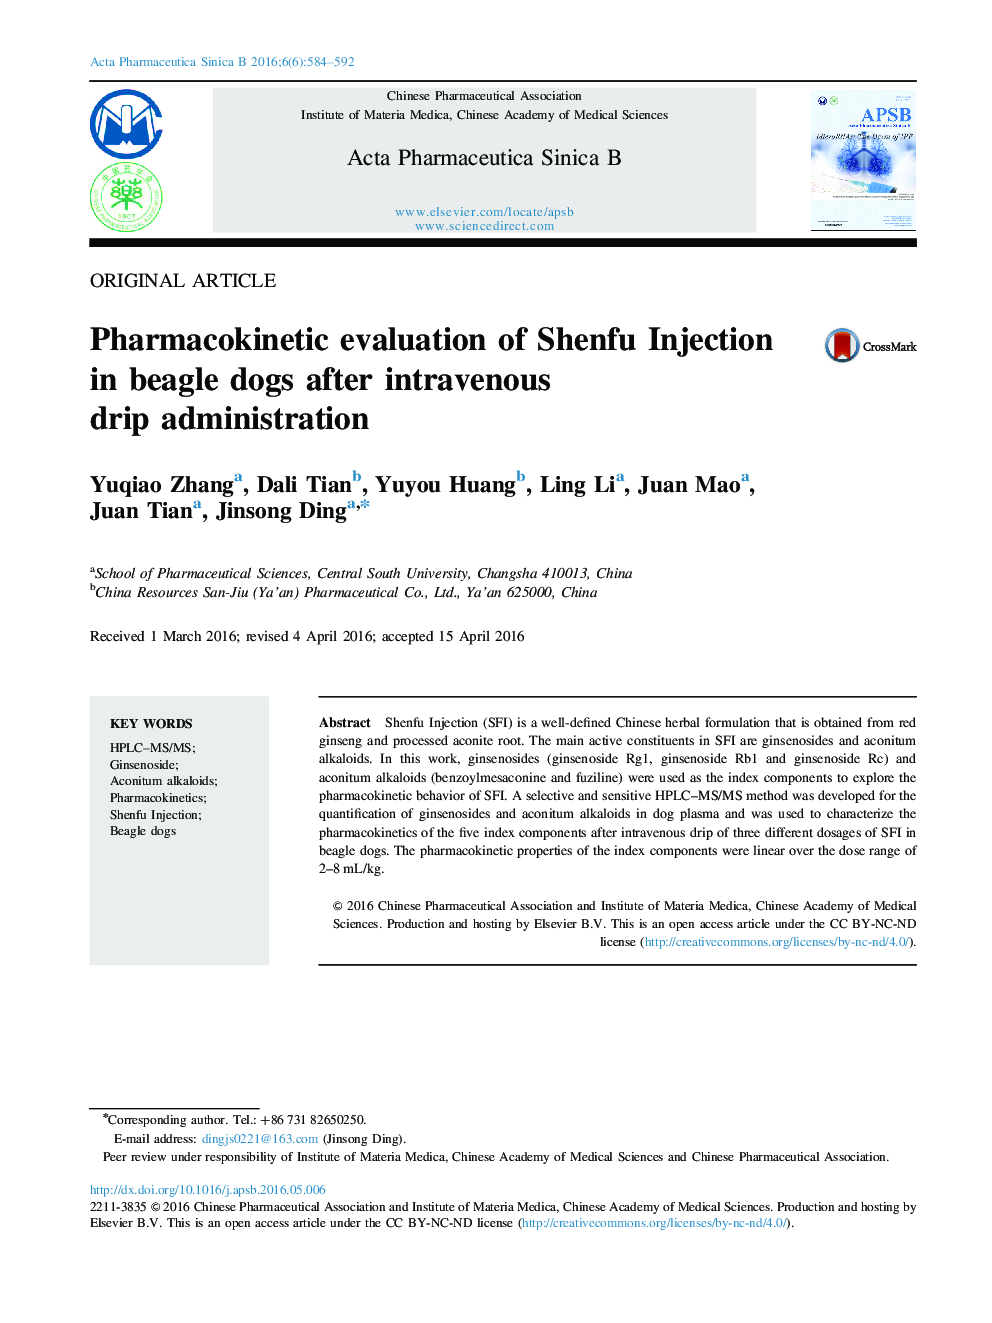 Pharmacokinetic evaluation of Shenfu Injection in beagle dogs after intravenous drip administration